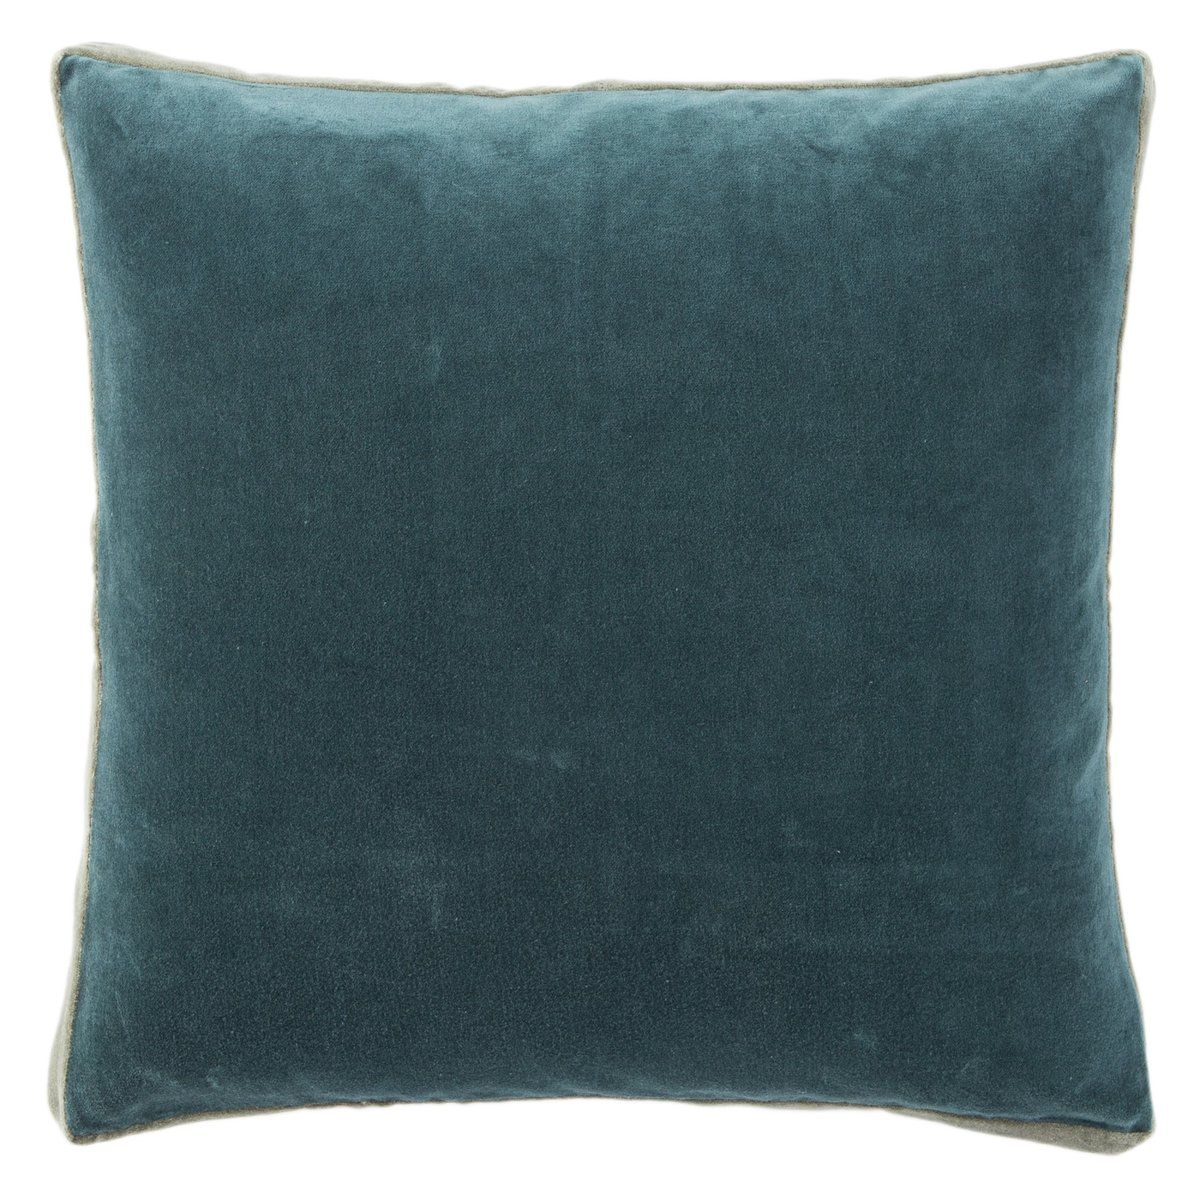 Emerson Pillow - Bryn | Rugs Direct